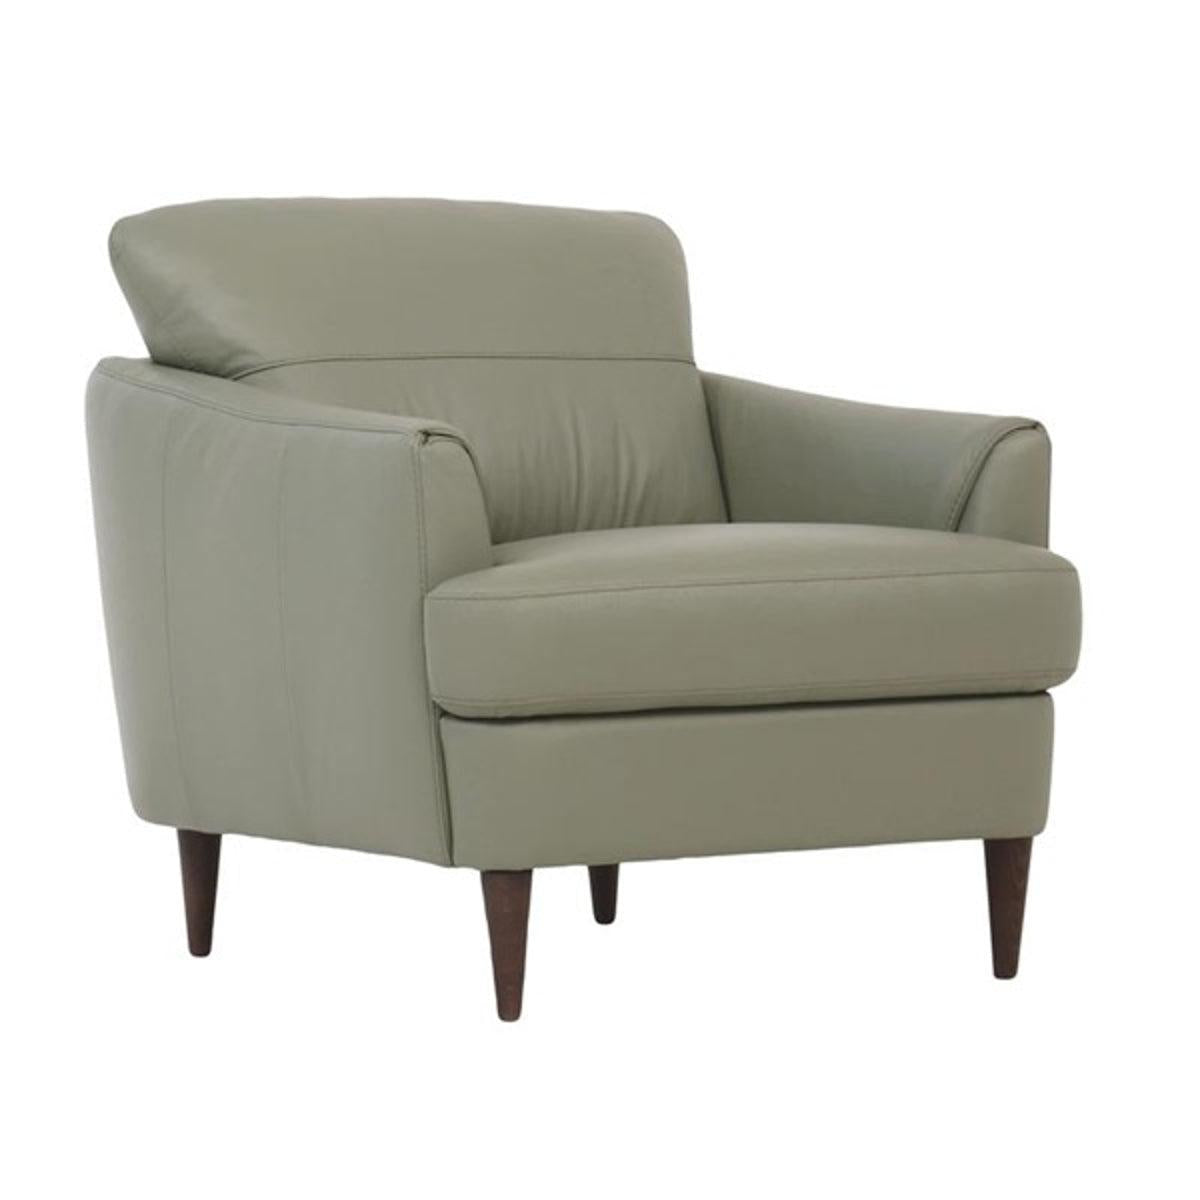 Acme Furniture Helena Chair in Moss Green 54572  Las Vegas Furniture Stores